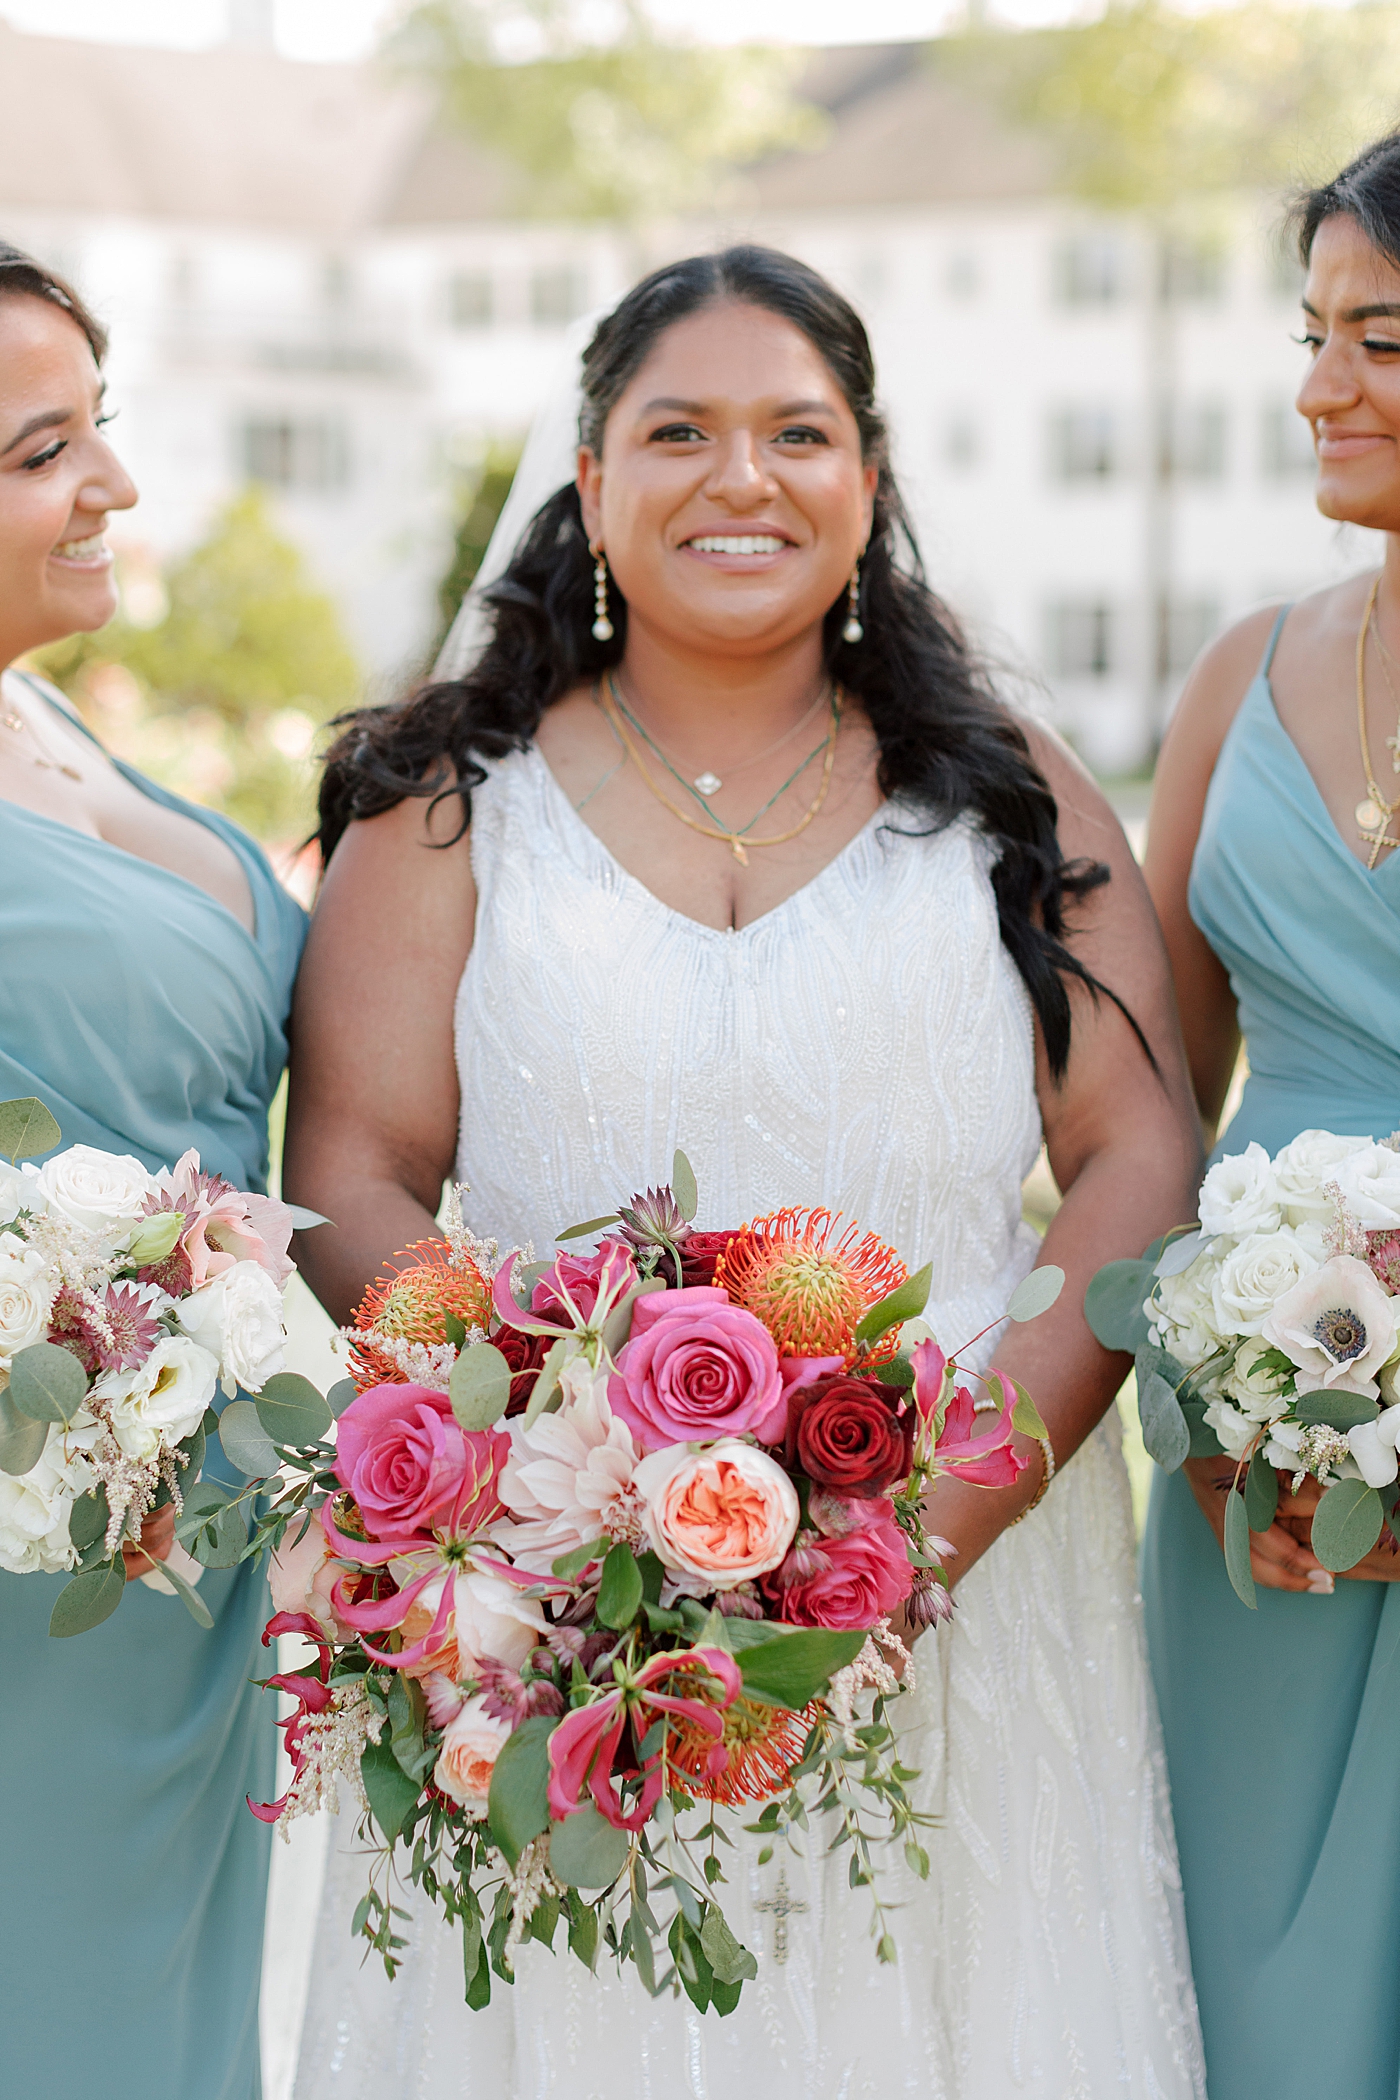 Close up of bride with colorful bouquet with her bridesmaids | Image by Hope Helmuth Photography